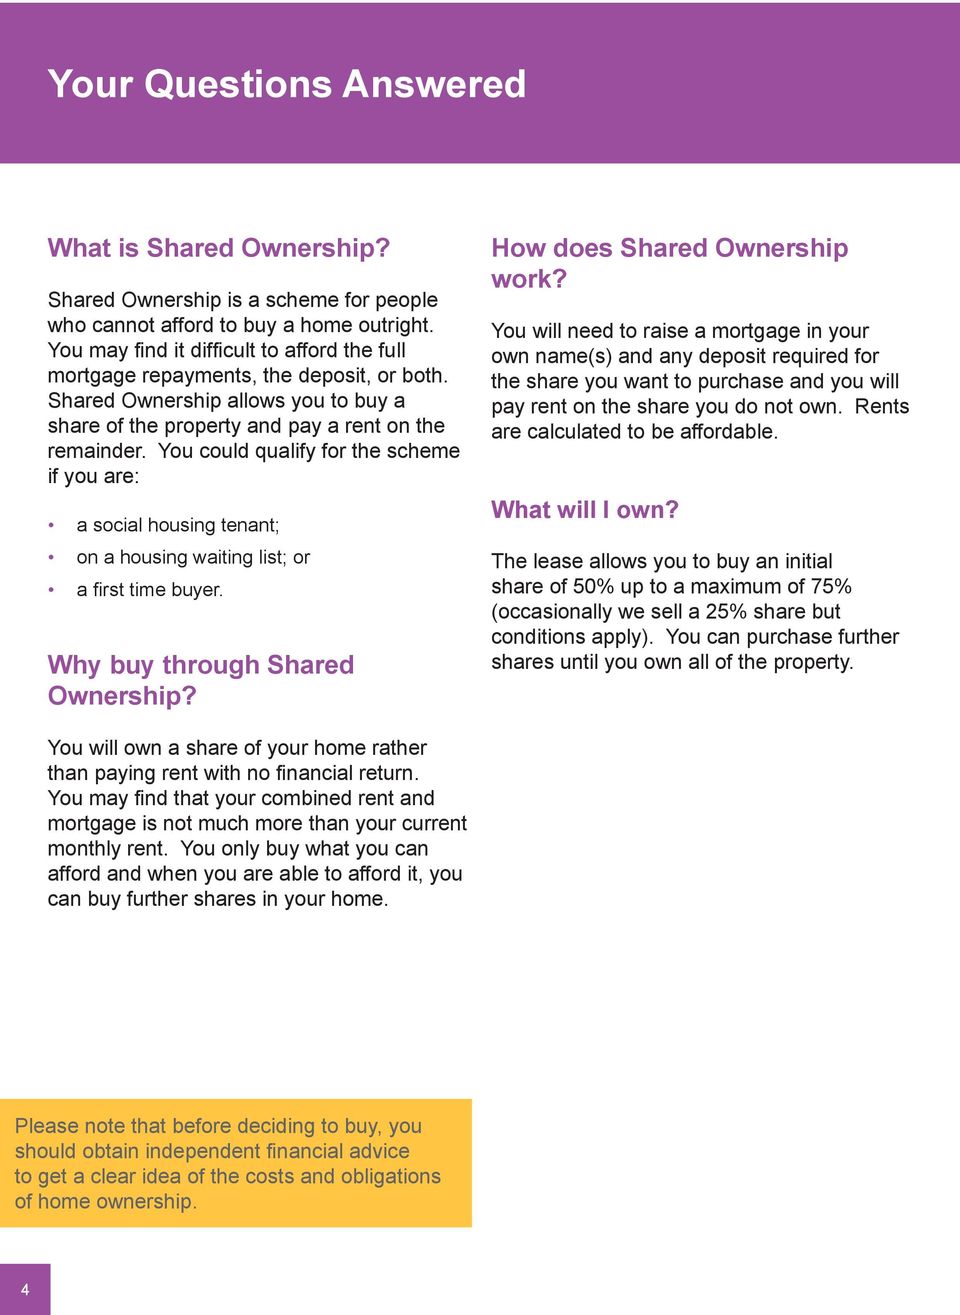 You could qualify for the scheme if you are: a social housing tenant; on a housing waiting list; or a first time buyer. Why buy through Shared Ownership? How does Shared Ownership work?